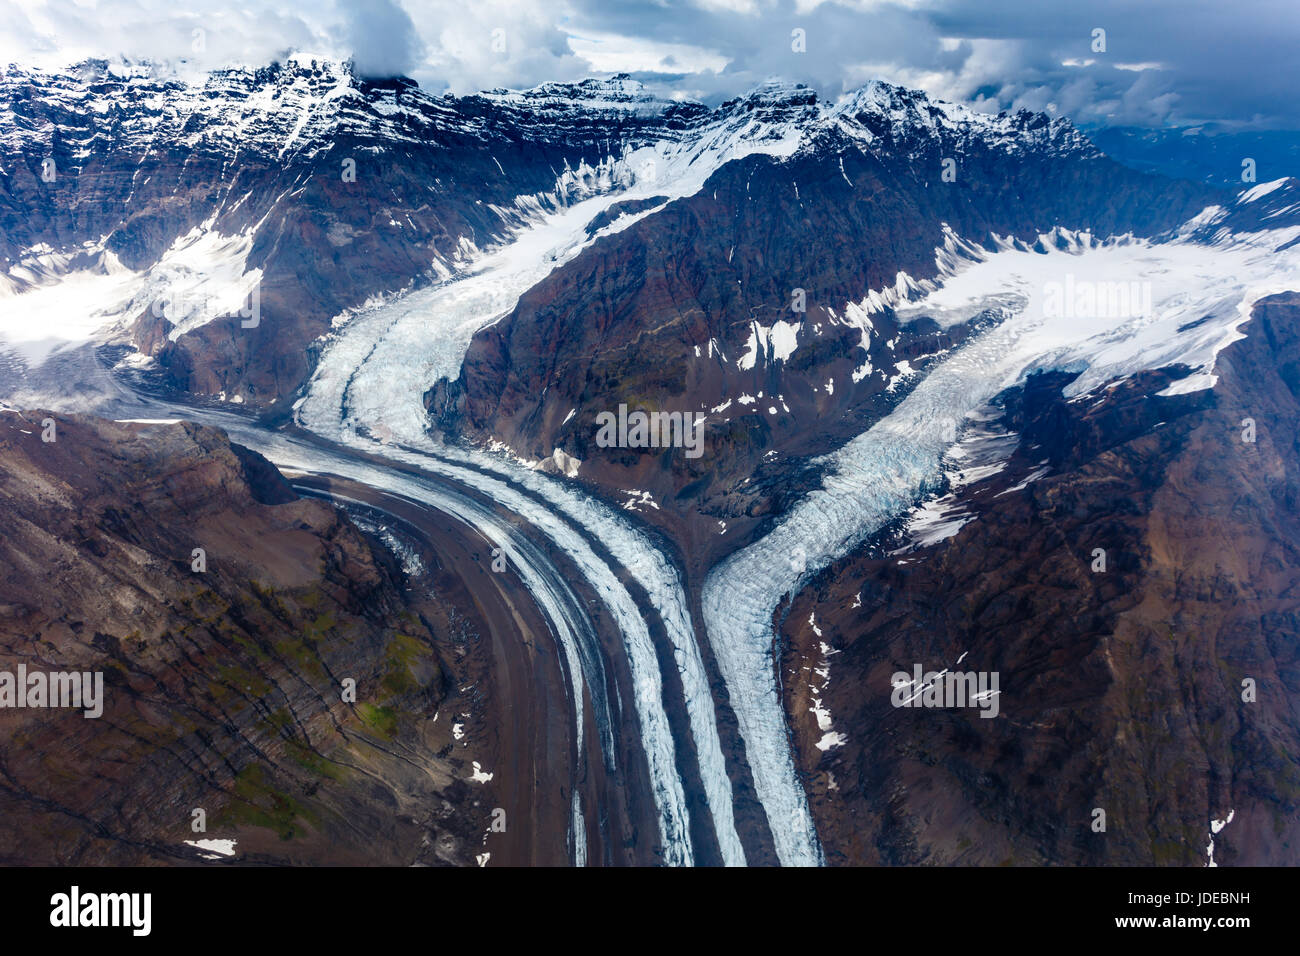 Pattern of snow capped mountains and melting glaciers in Alaska wilderness Stock Photo